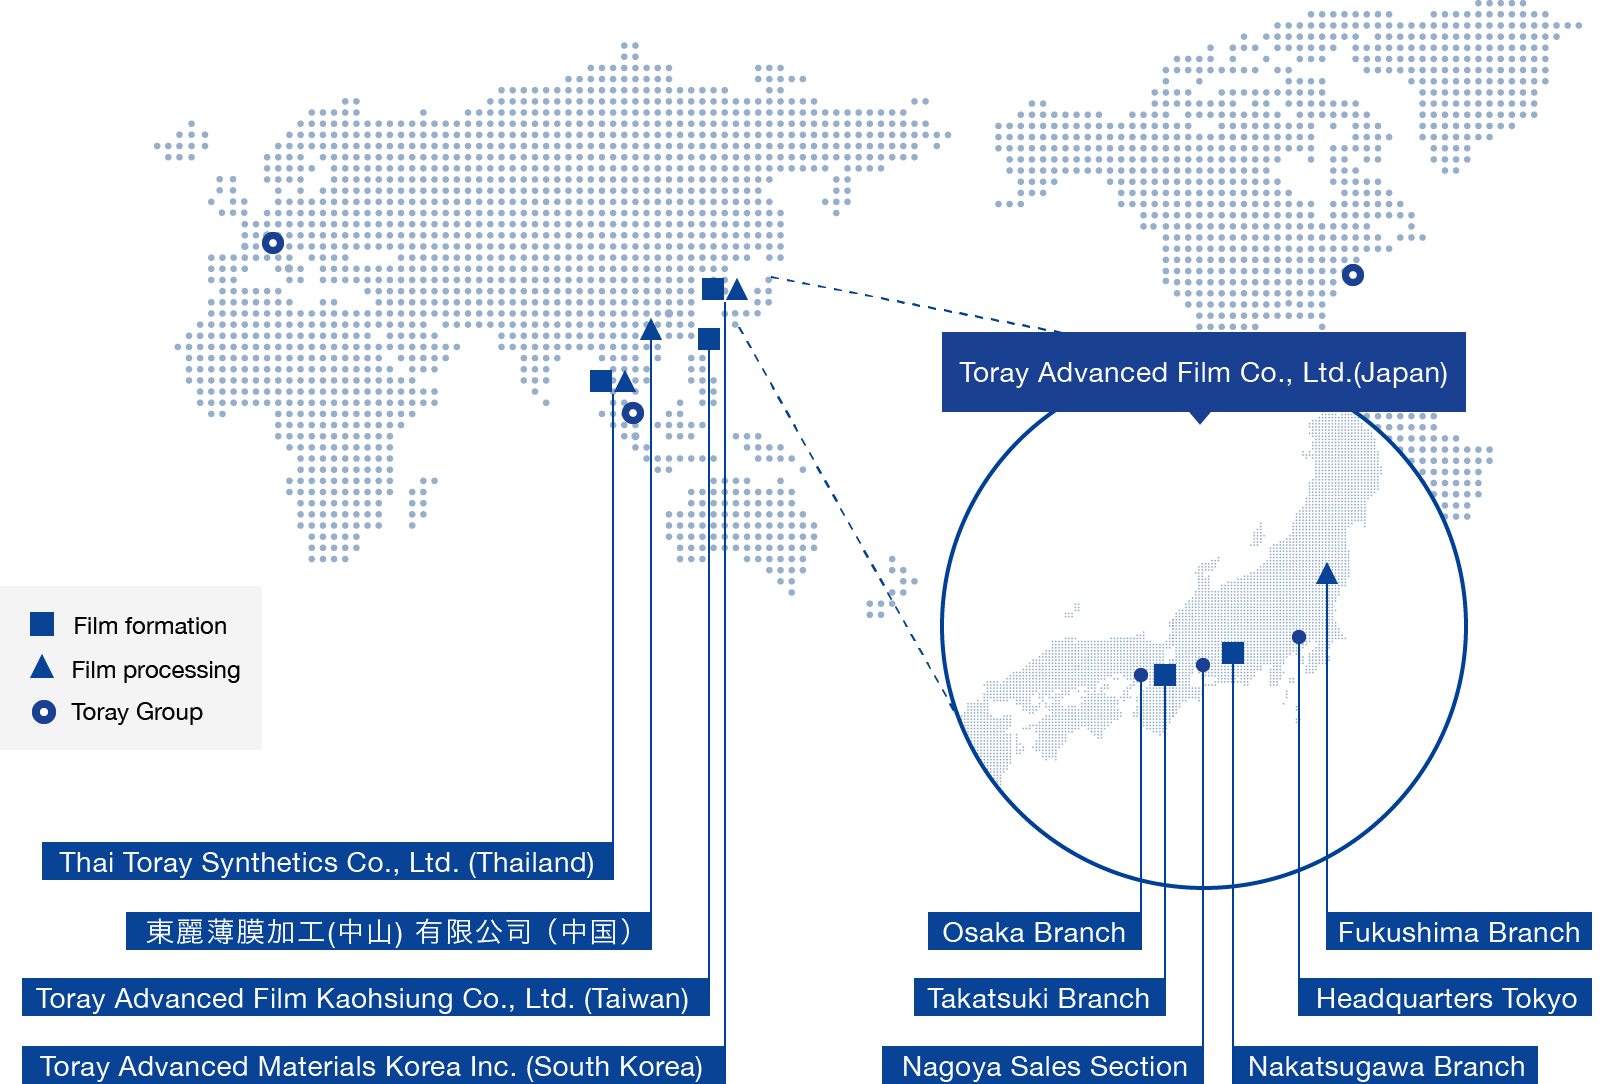 Global Network of Toray Advanced Film and the Toray Group